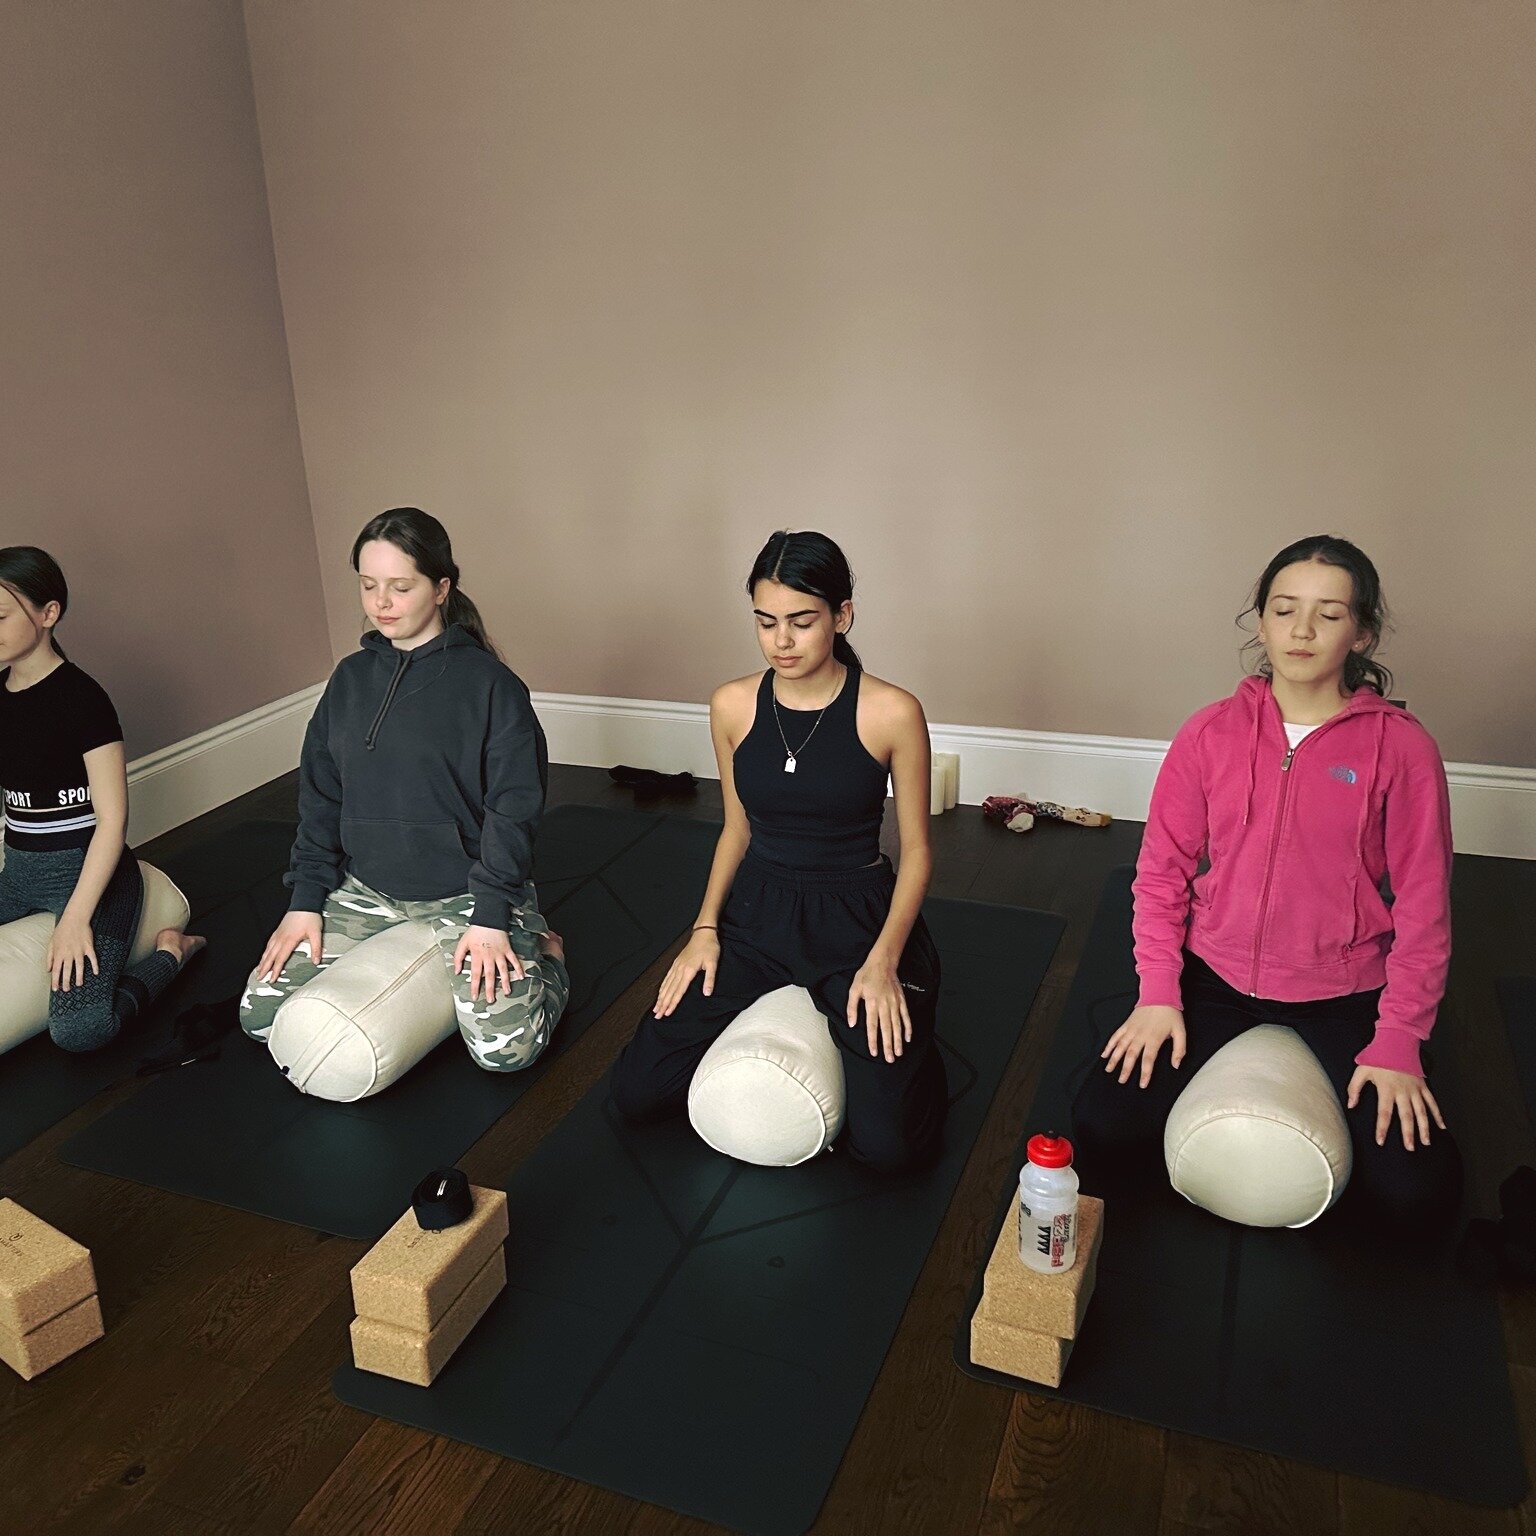 TEEN MOVEMENT &amp; MINDFULNESS | 

It's a long time ago since I was a teen but I remember it vividly. It felt so overwhelming at times. The raging hormones, body development, external pressures from school, family and friends. Figuring out who you a